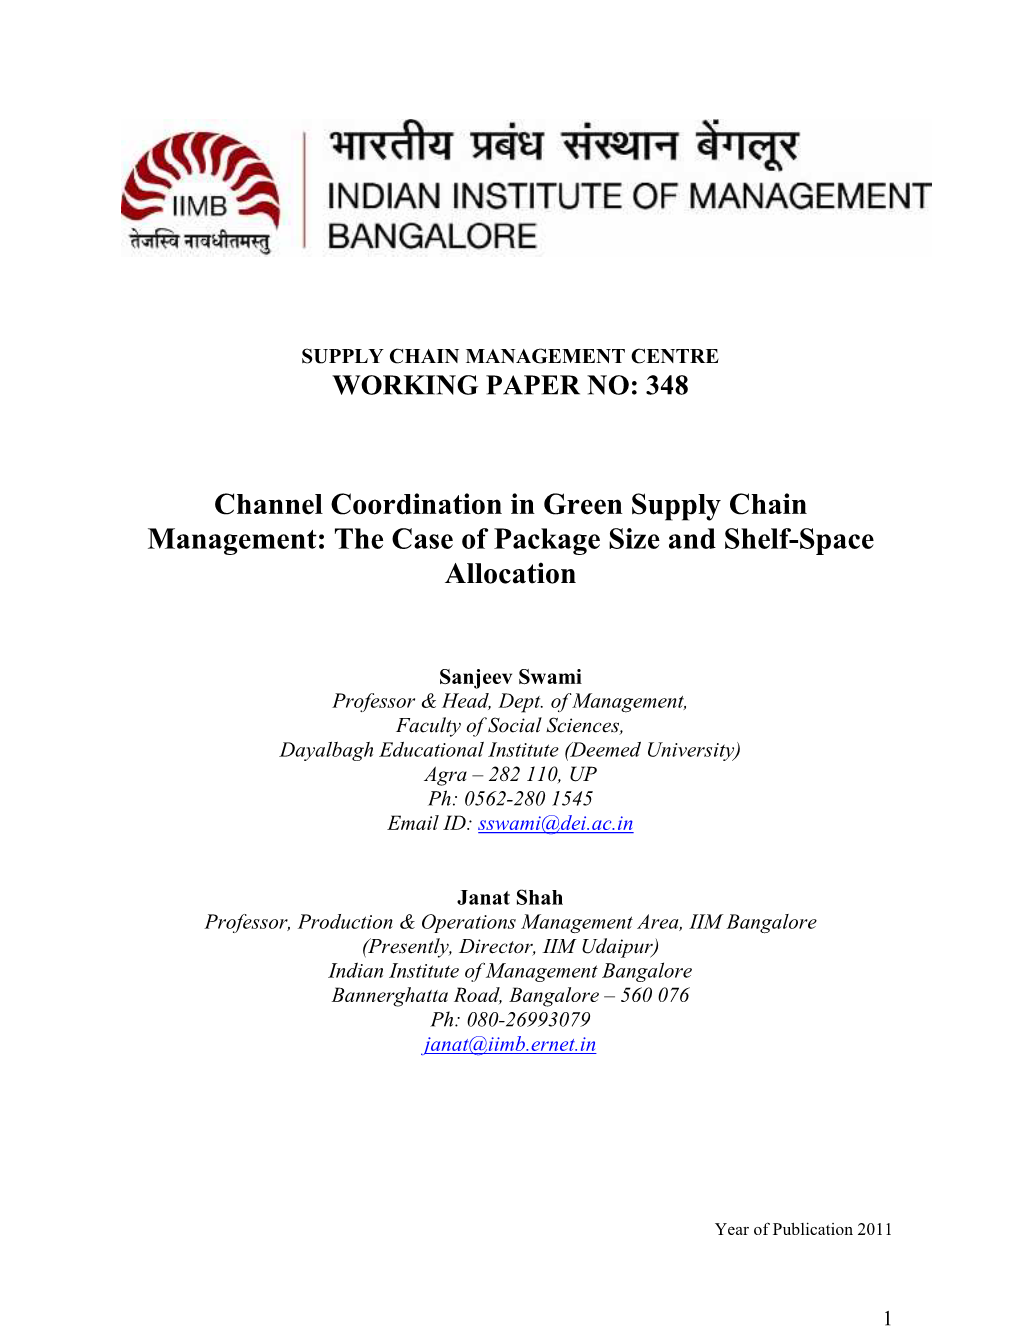 Channel Coordination in Green Supply Chain Management: the Case of Package Size and Shelf-Space Allocation